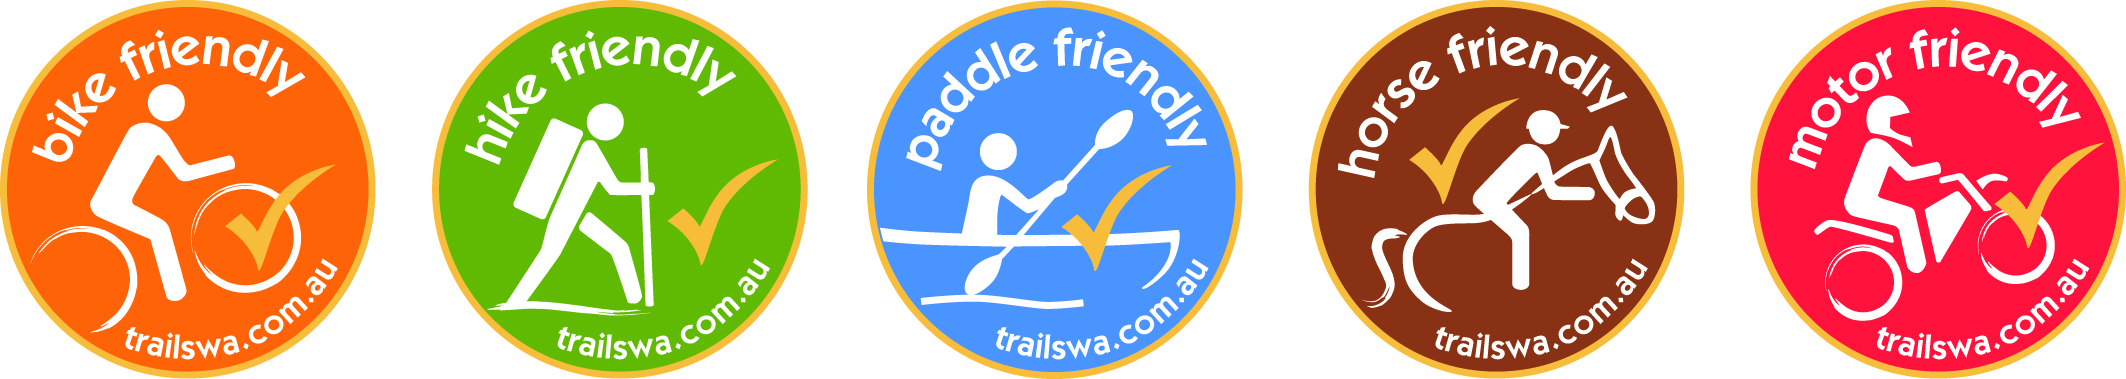 Trail Friendly Business Badges